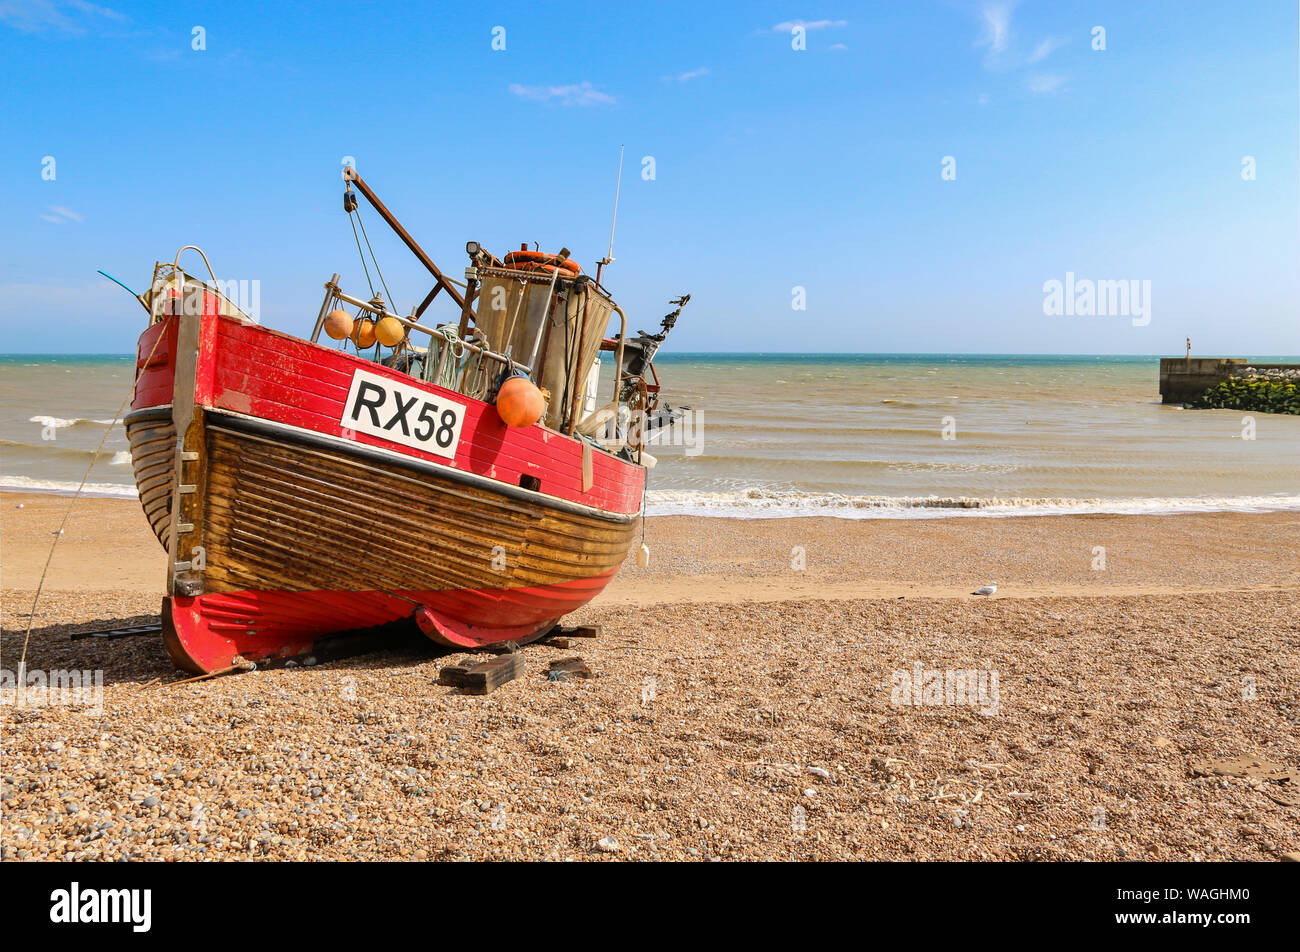 Rx58 High Resolution Stock Photography and Images - Alamy